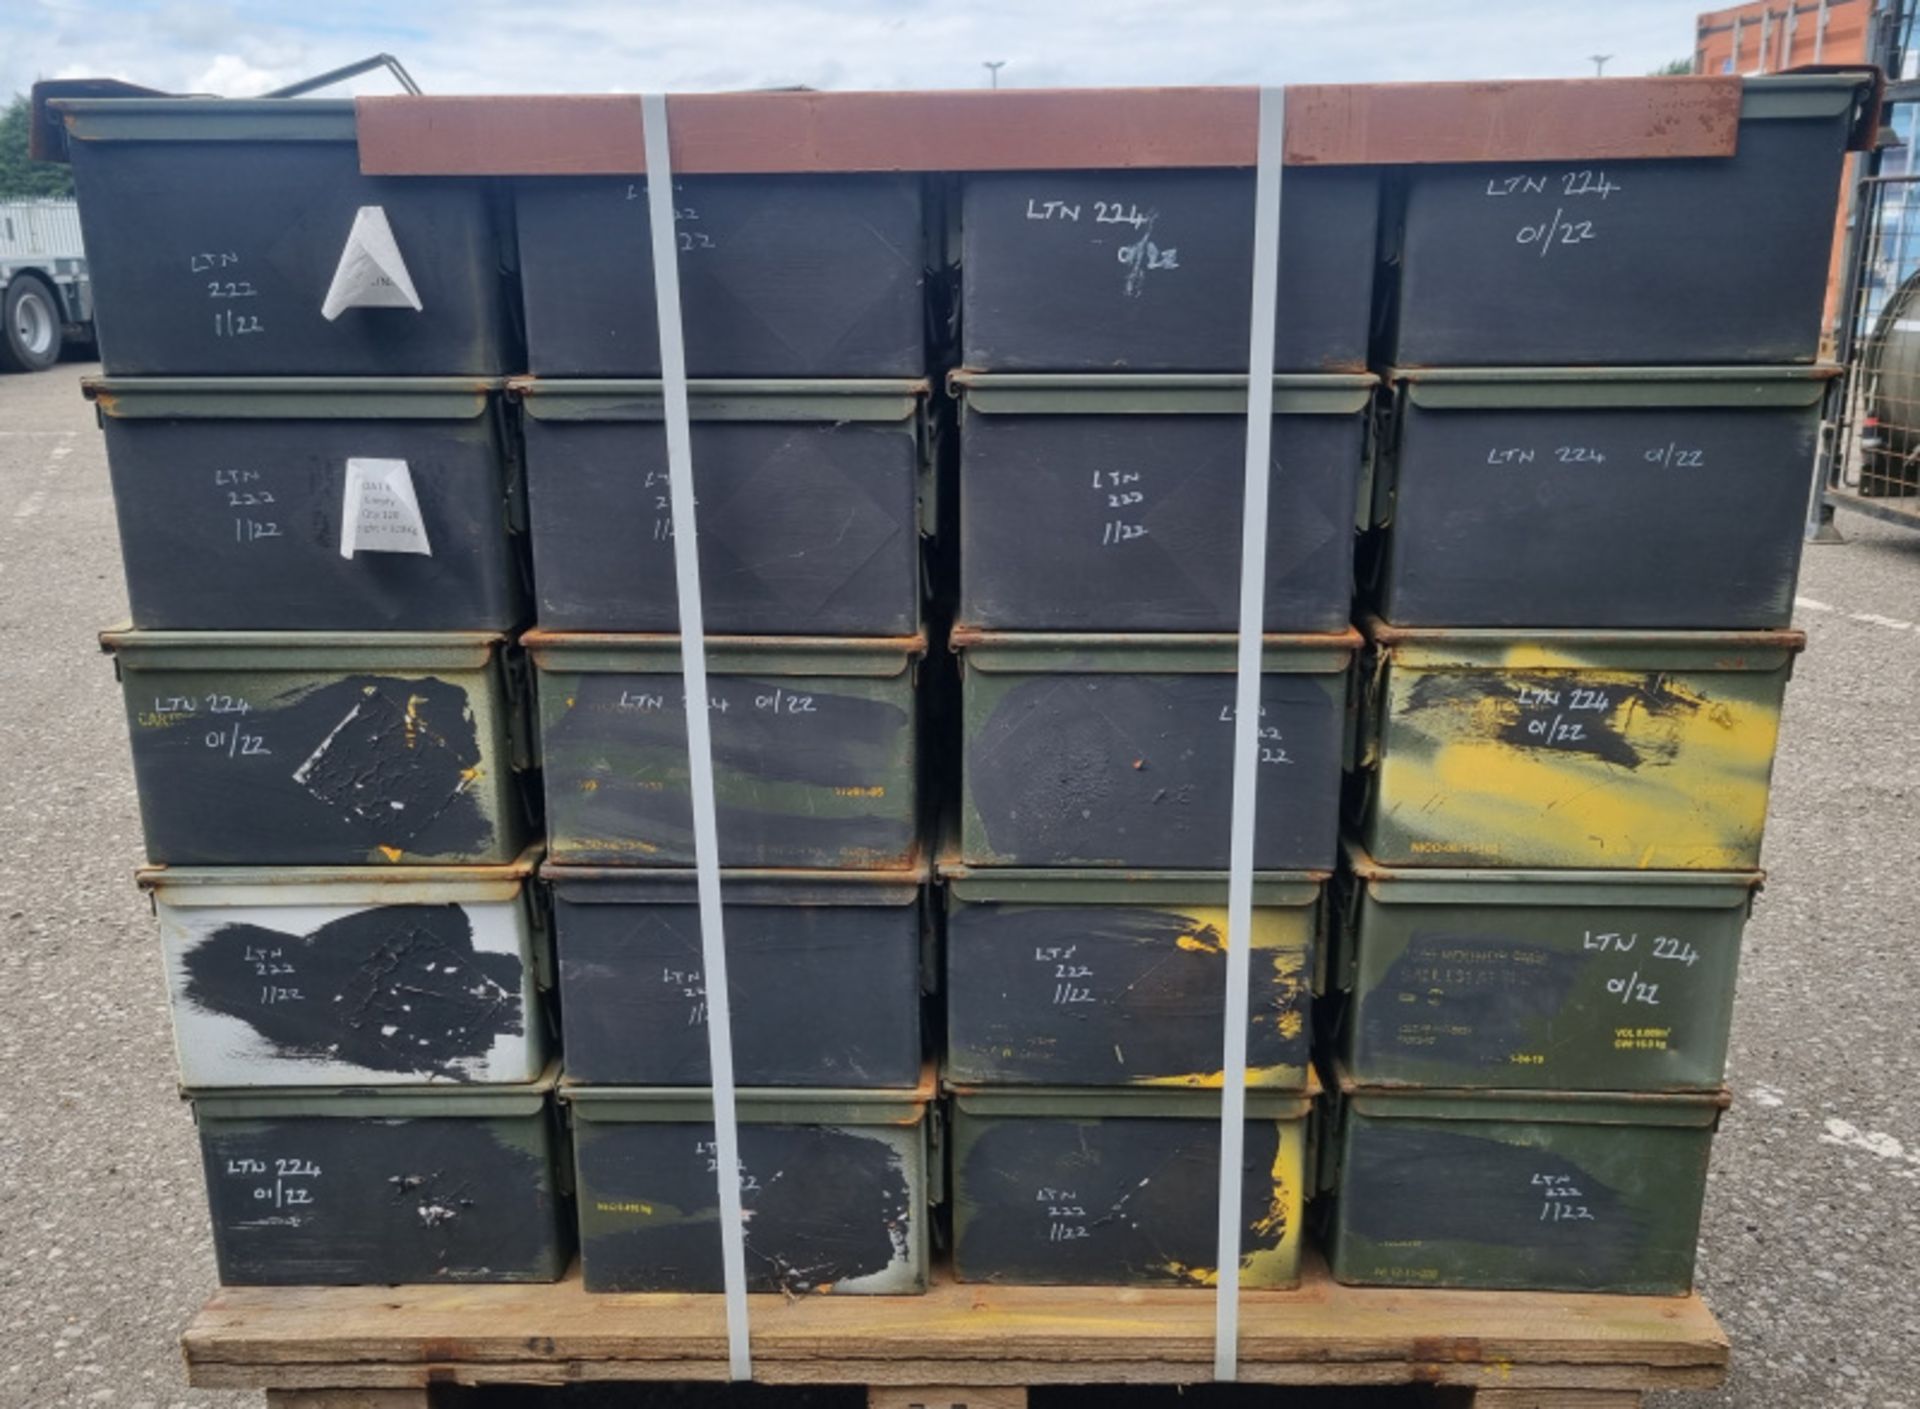 1x Pallet of M2A1 ammo containers - total quantity 120 - Image 3 of 11